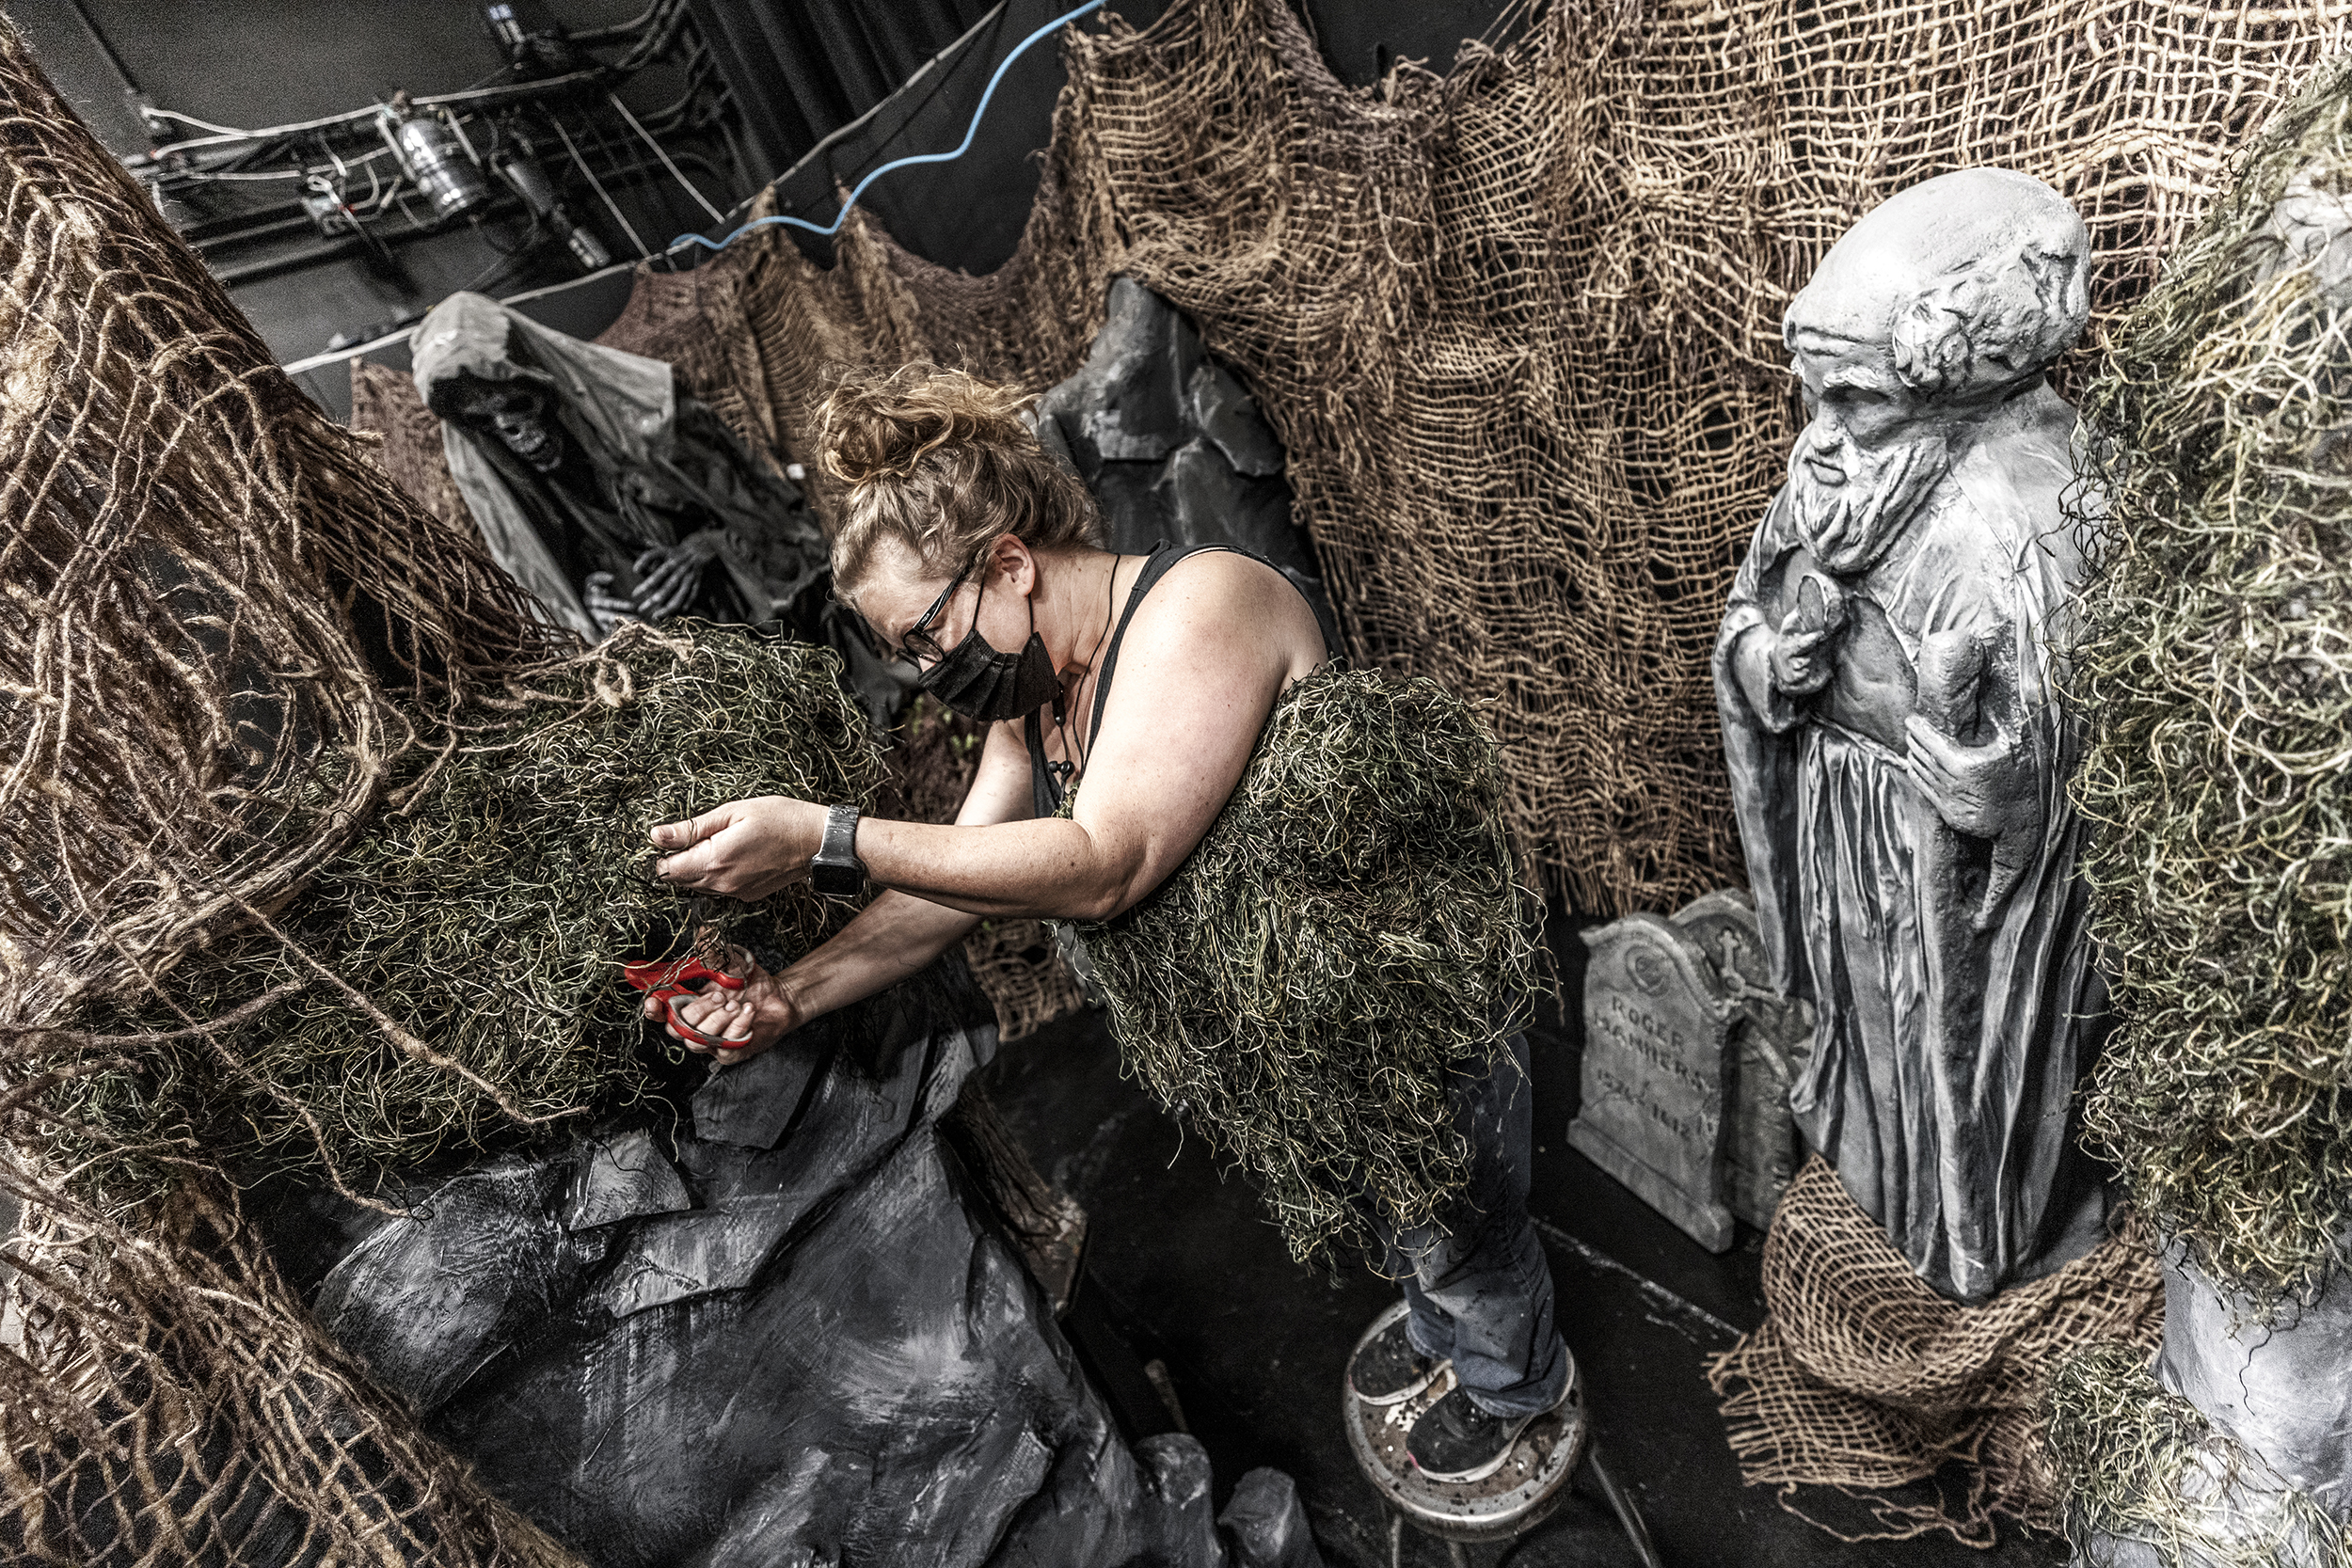 Production designer Jill Hibbard works on the scenery among the statuary.